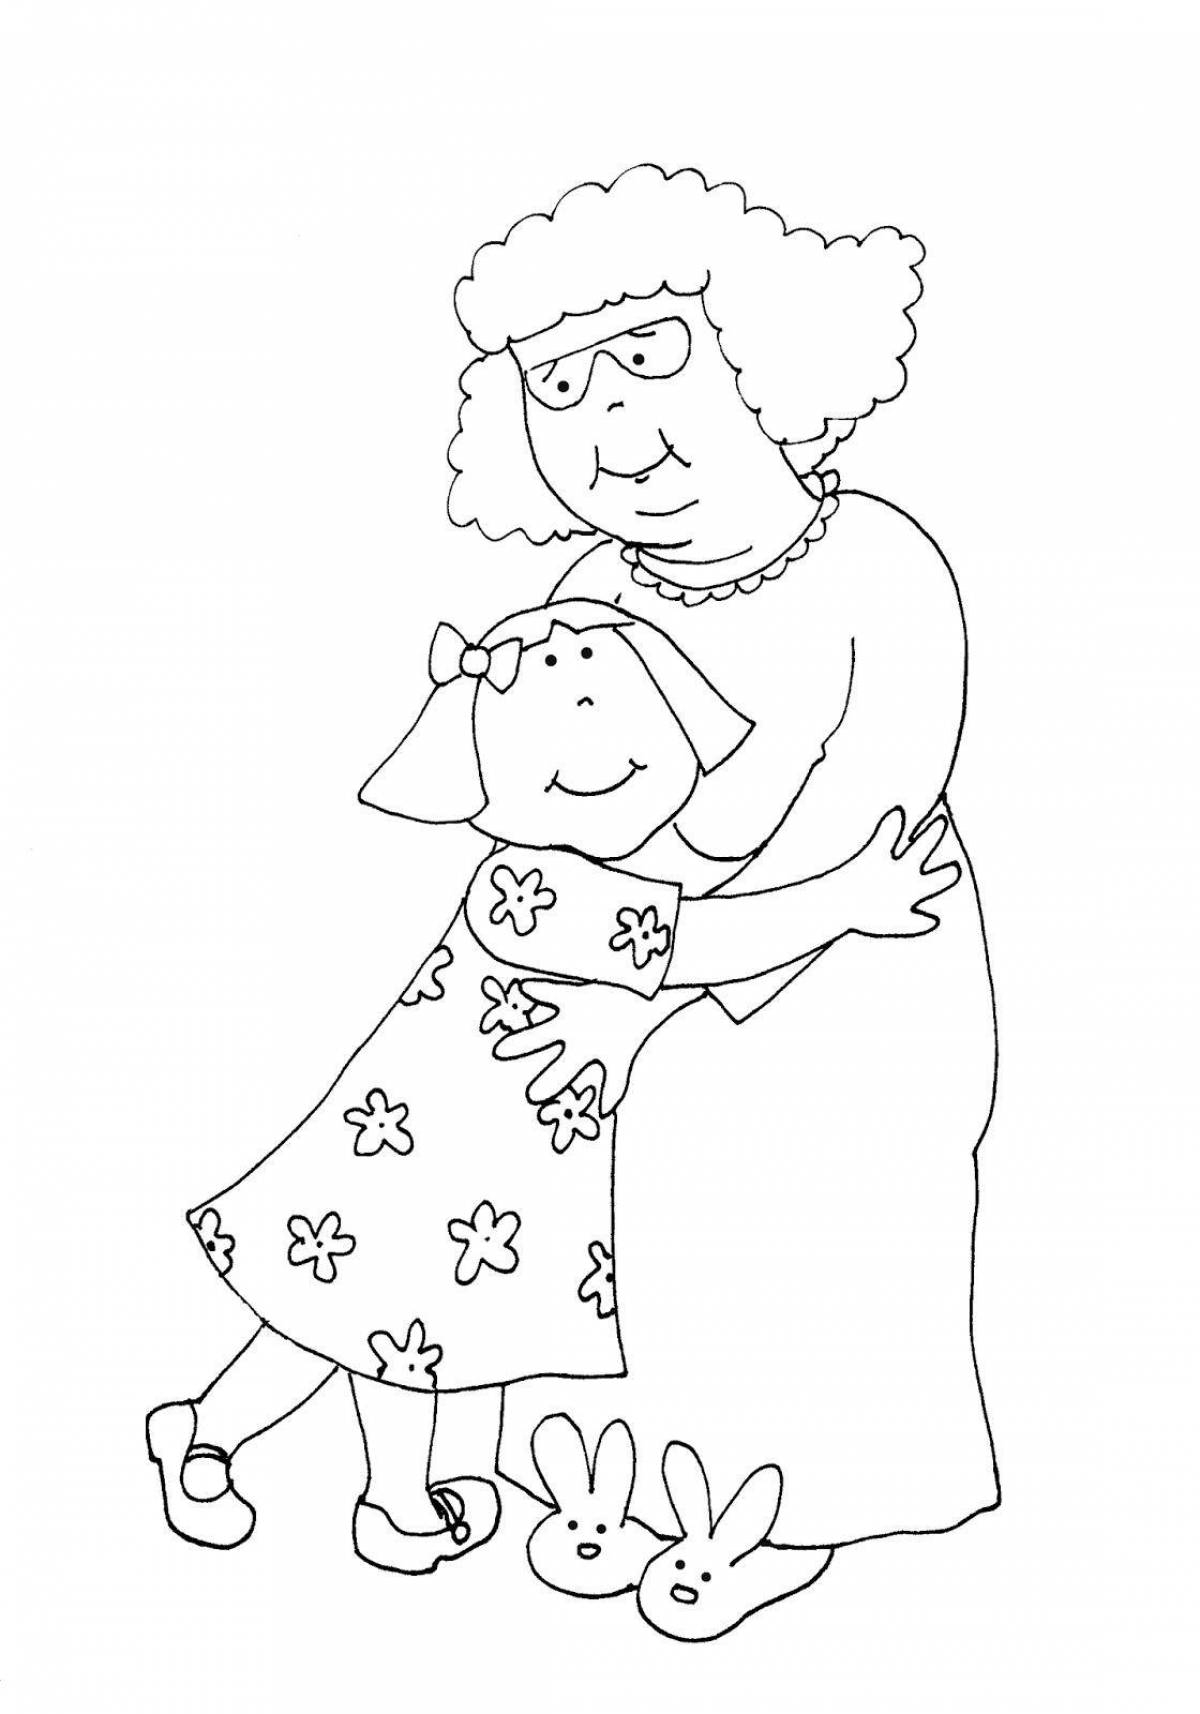 Coloring page playful grandmother and granddaughter